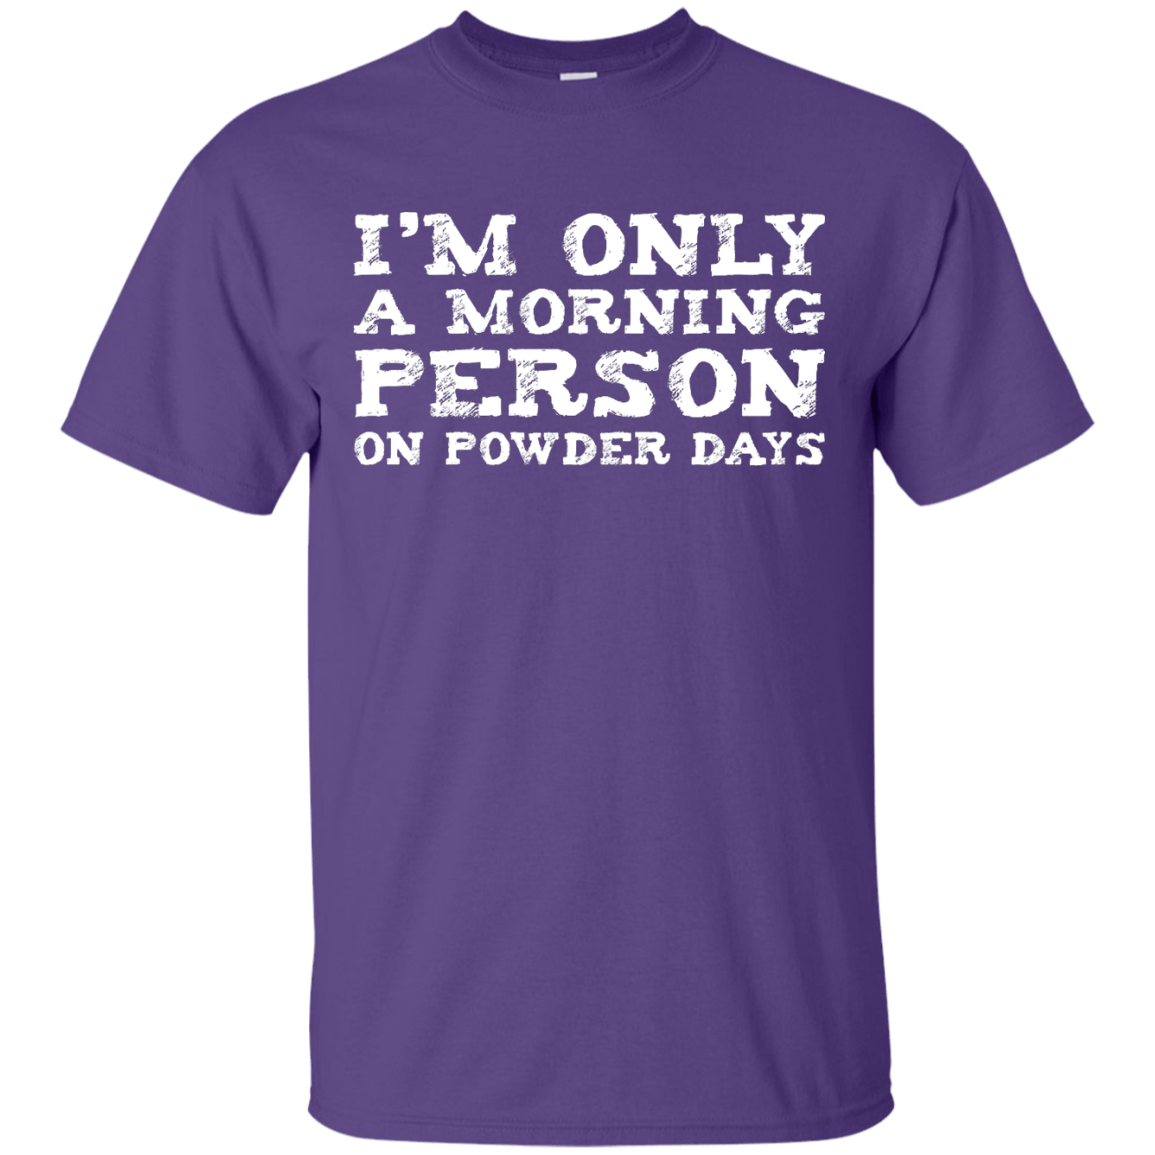 I'm Only A Morning Person On Powder Days Men's Tees and V-Neck - Powderaddicts